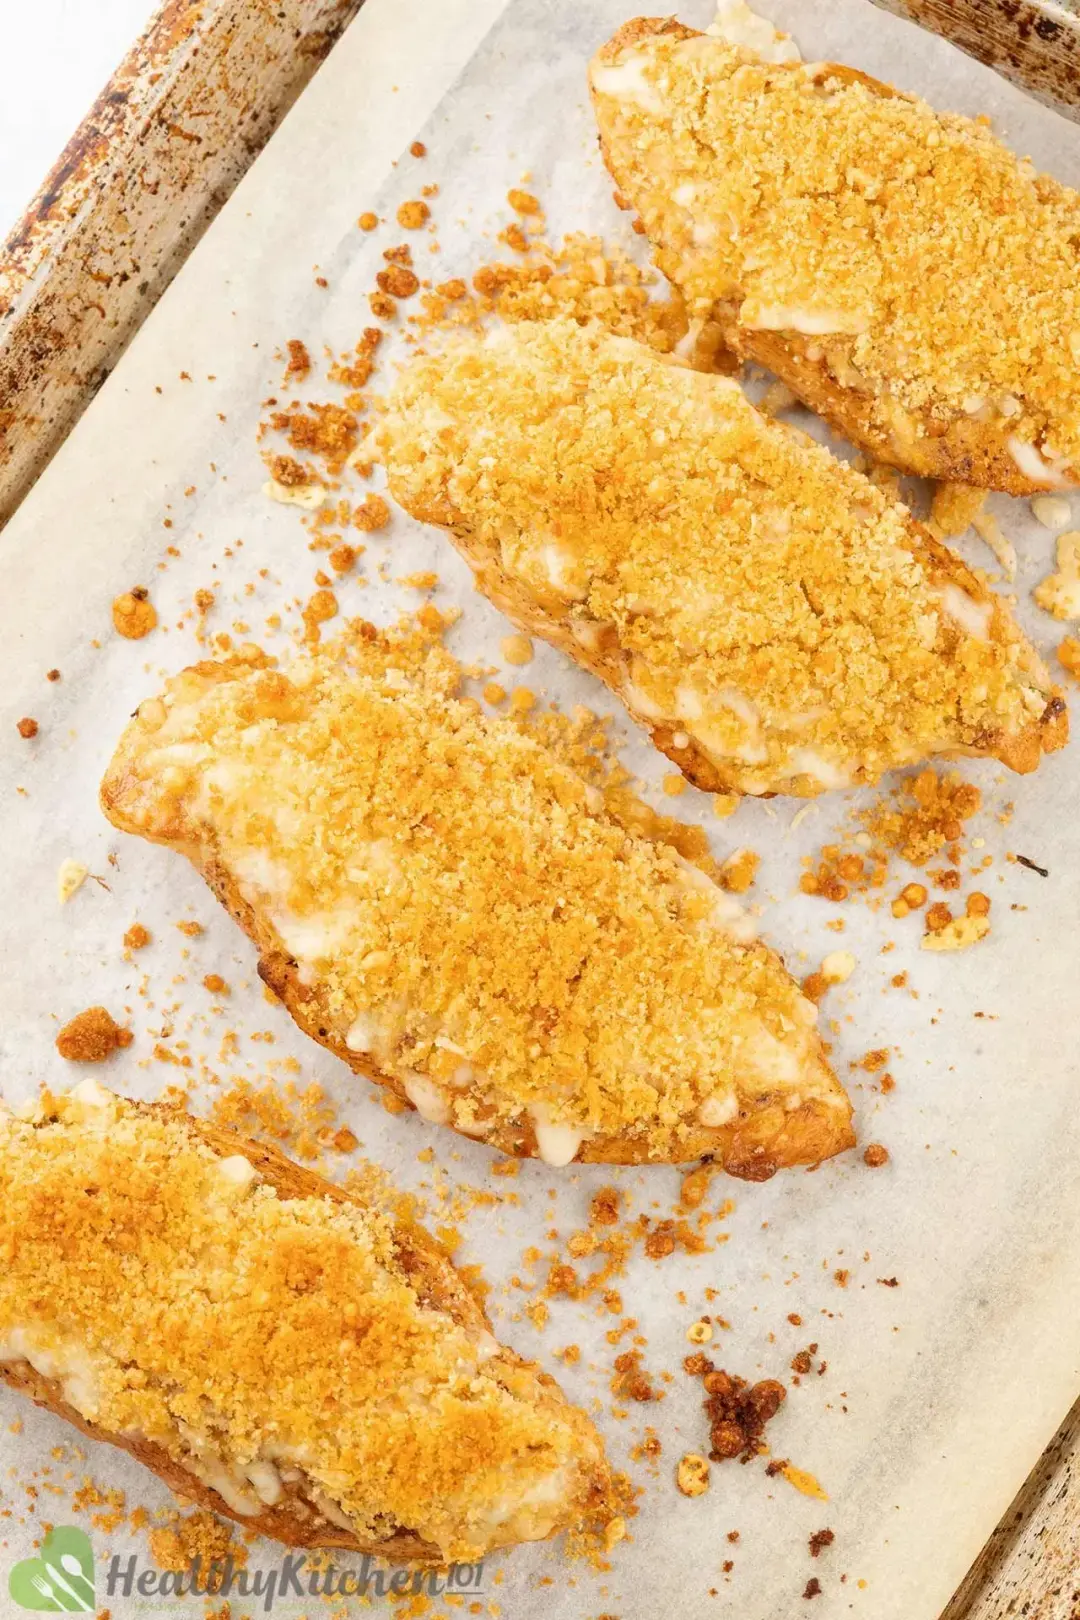 How to Store and Reheat Longhorn Parmesan Crusted Chicken